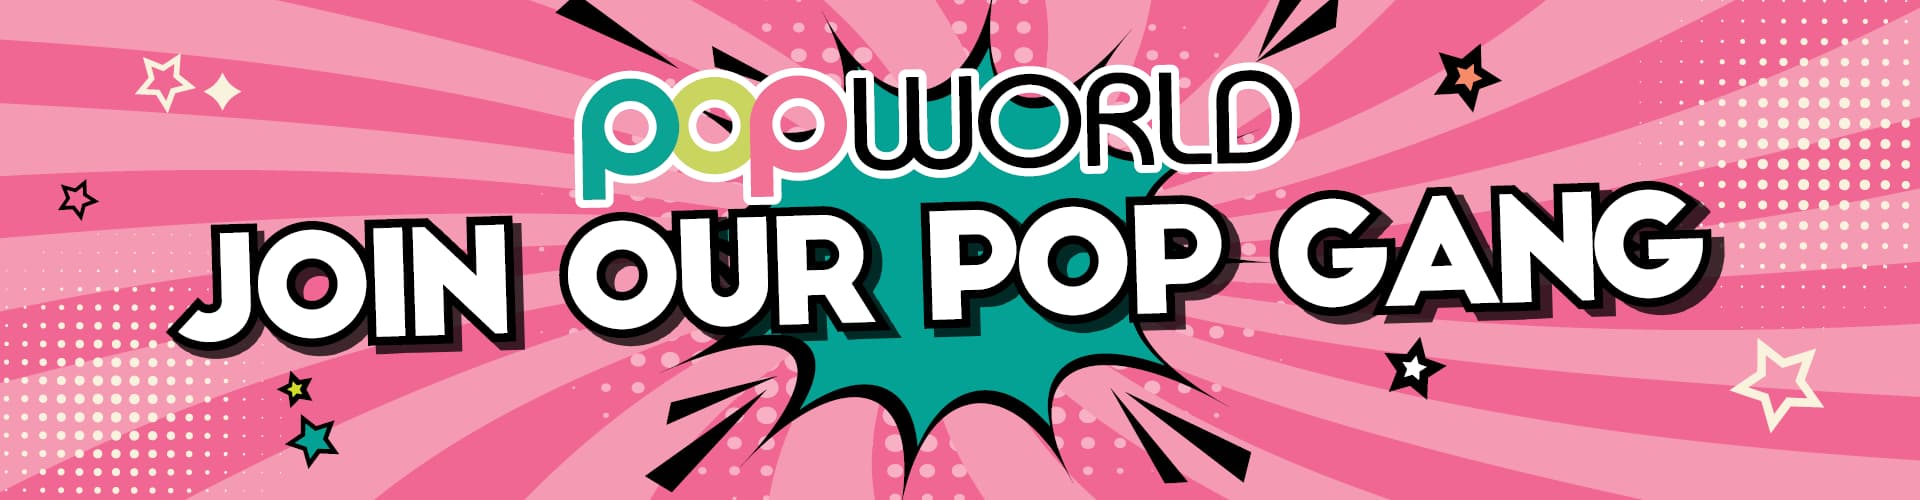 Join our Popworld and Zinc Redditch gang! Sign up today